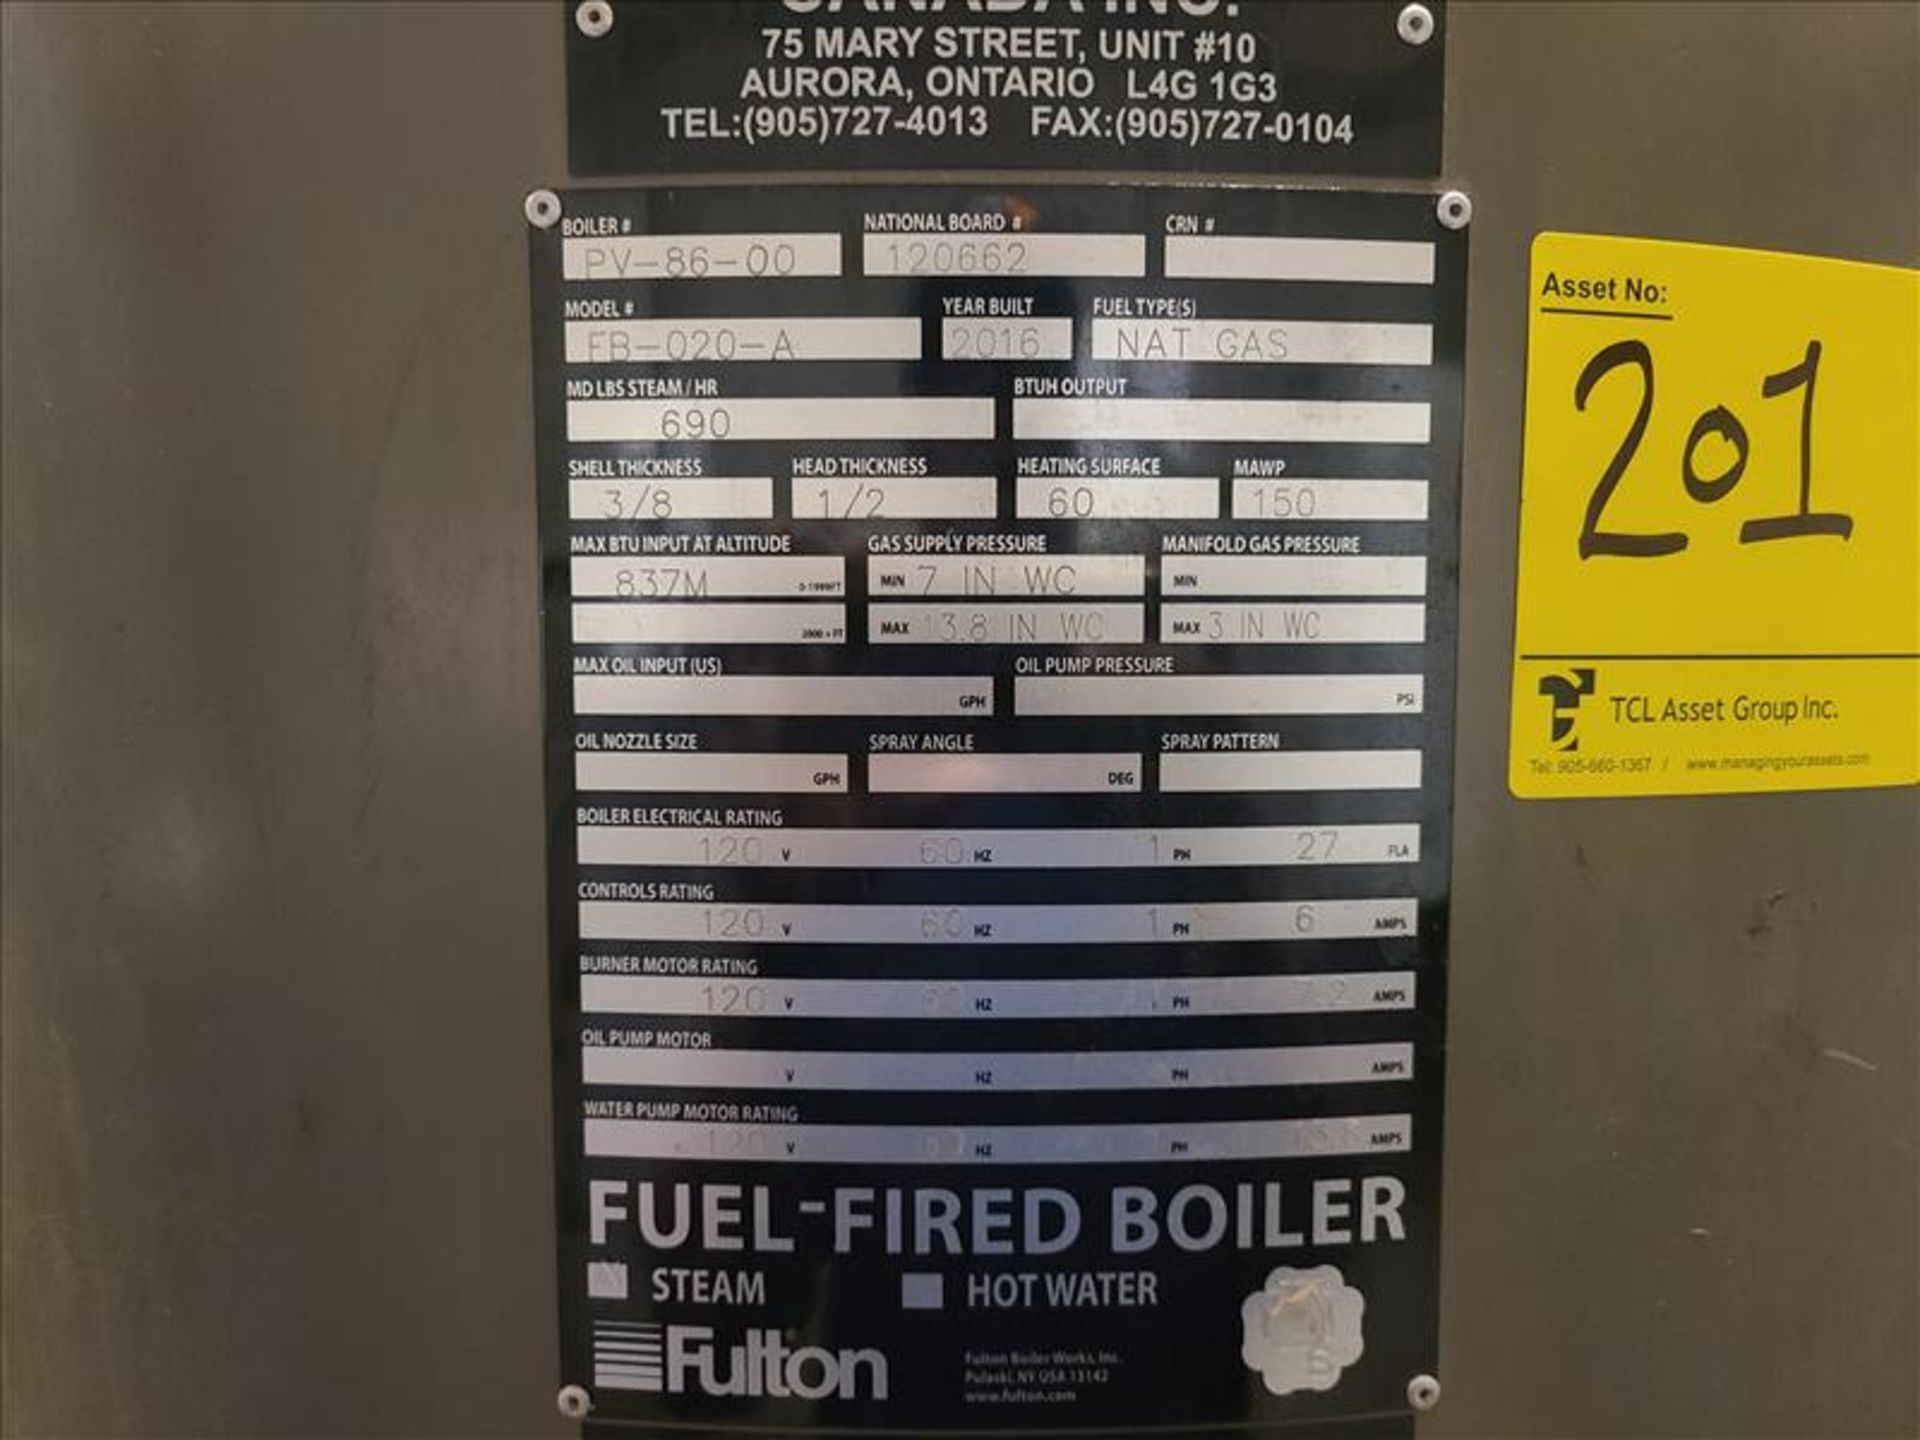 Fulton Fuel-Fired Vertical Tubeless Boiler, mod. FB-020-A, ser. no. PV-86-00, 120 volts, 1 phase, 60 - Image 2 of 2